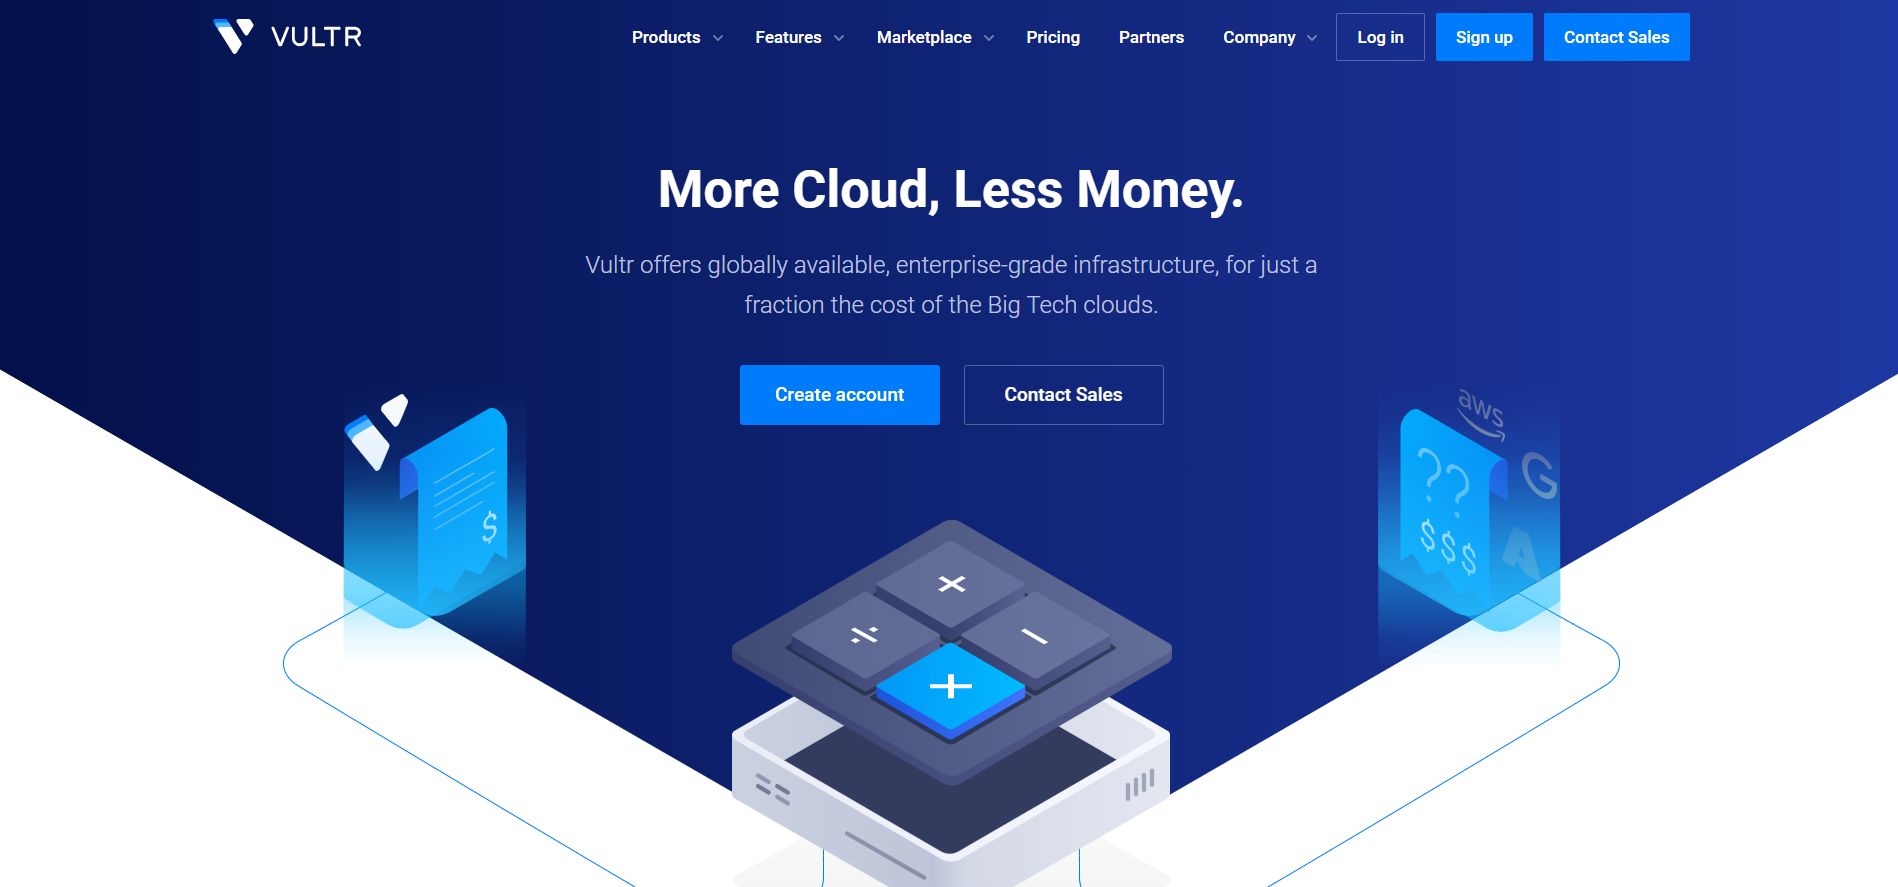 Where to Buy Vultr Accounts